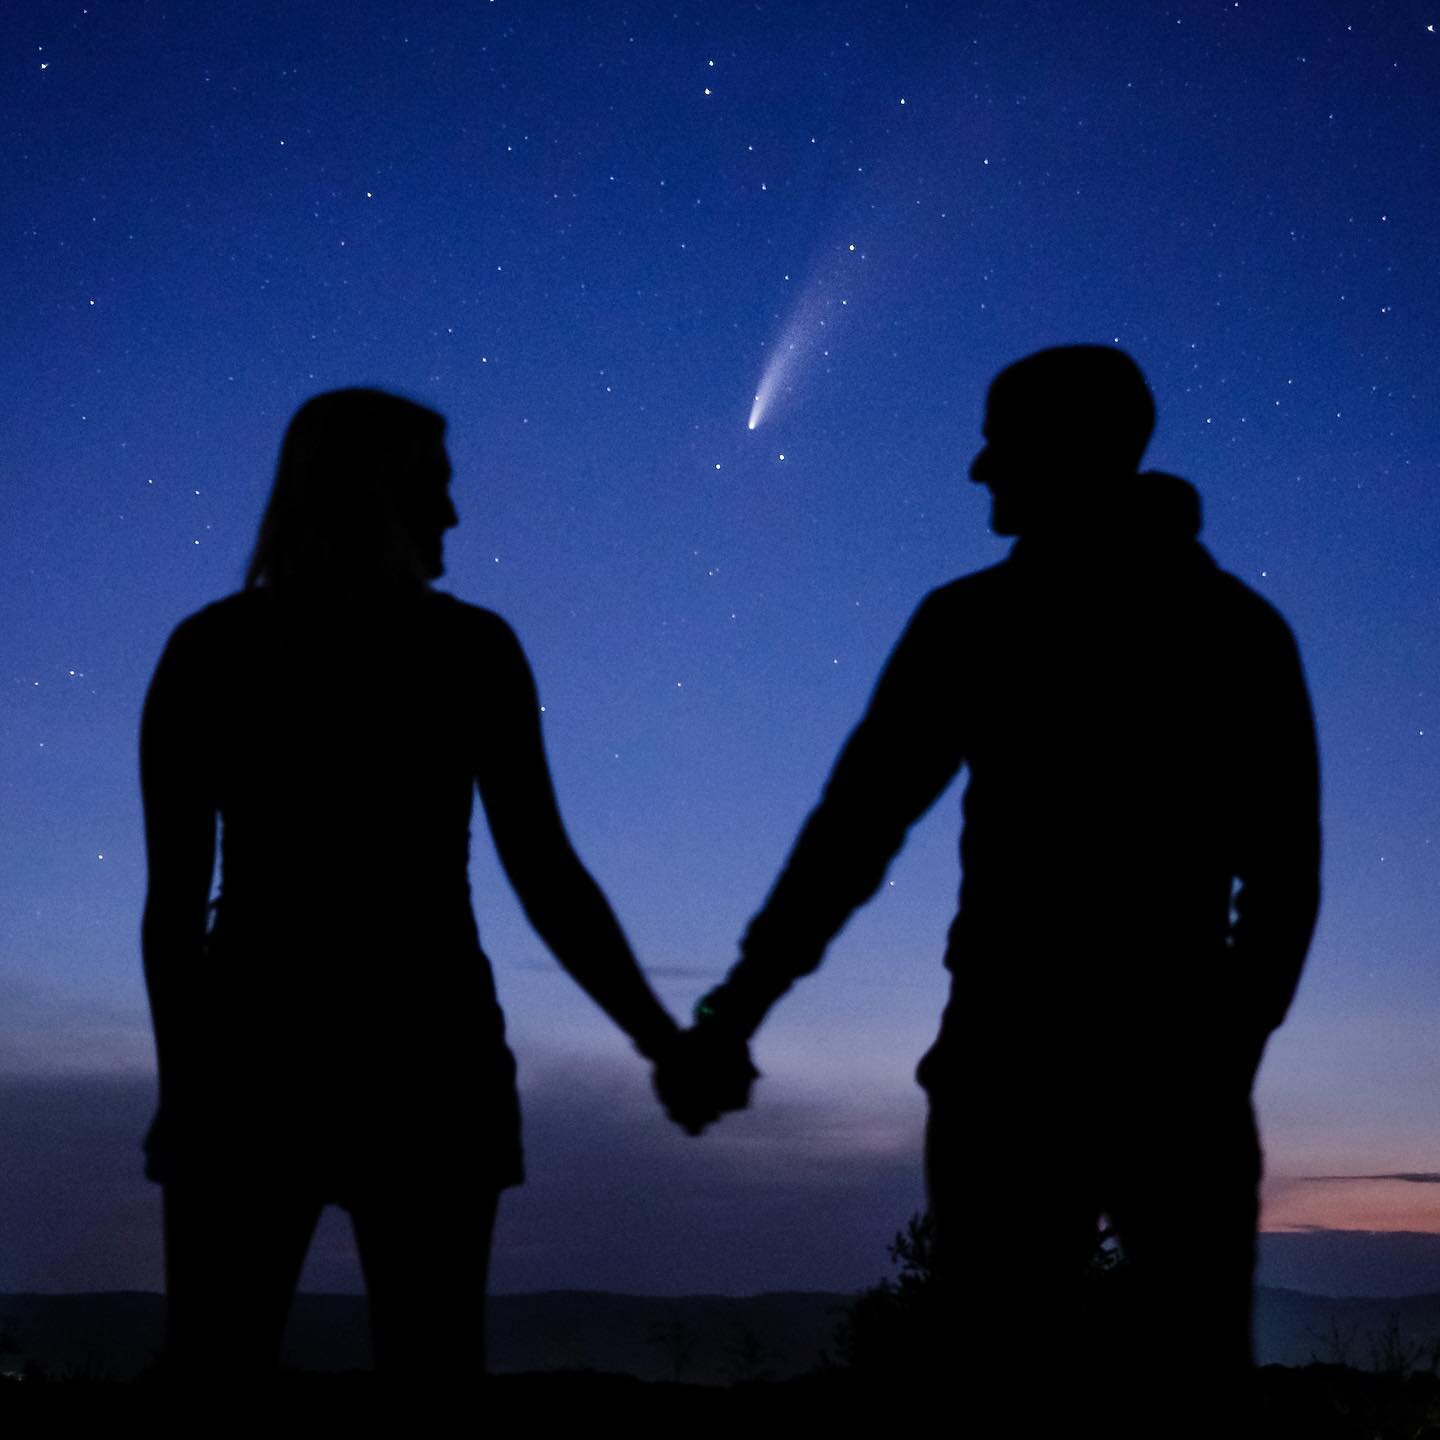 Had the opportunity to photograph one of my good friends propose to his girlfriend under Neowise.  Last minute plan for a memory that will last a lifetime #adirondacks #localadk #pureadk